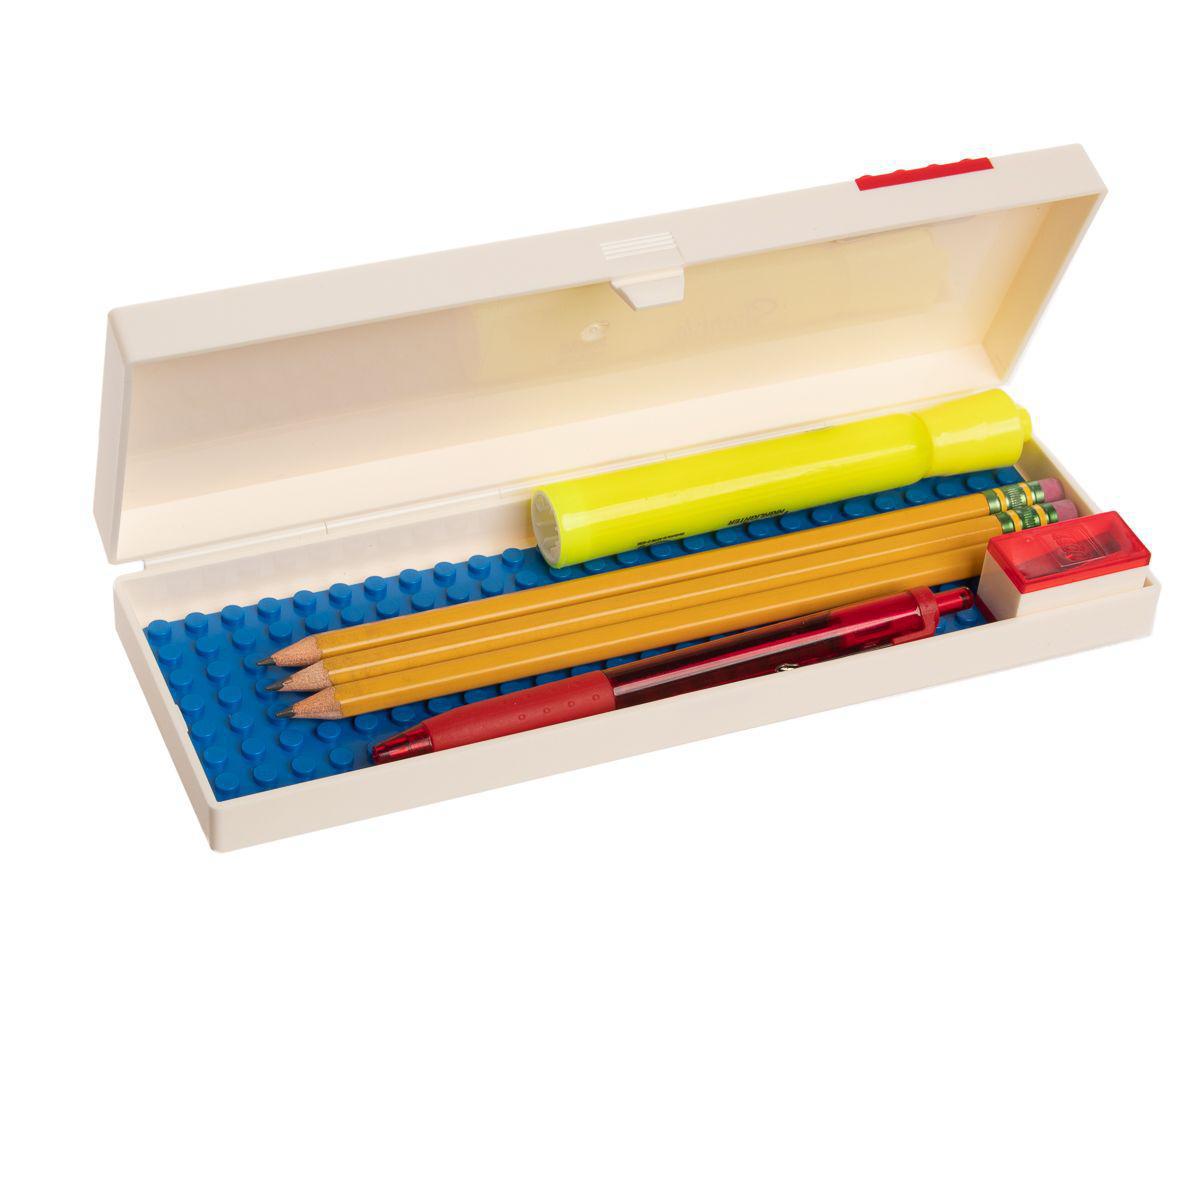 LEGO Pencil Case – Store & Stack, Carry To School Or Work! (Red) 5005110